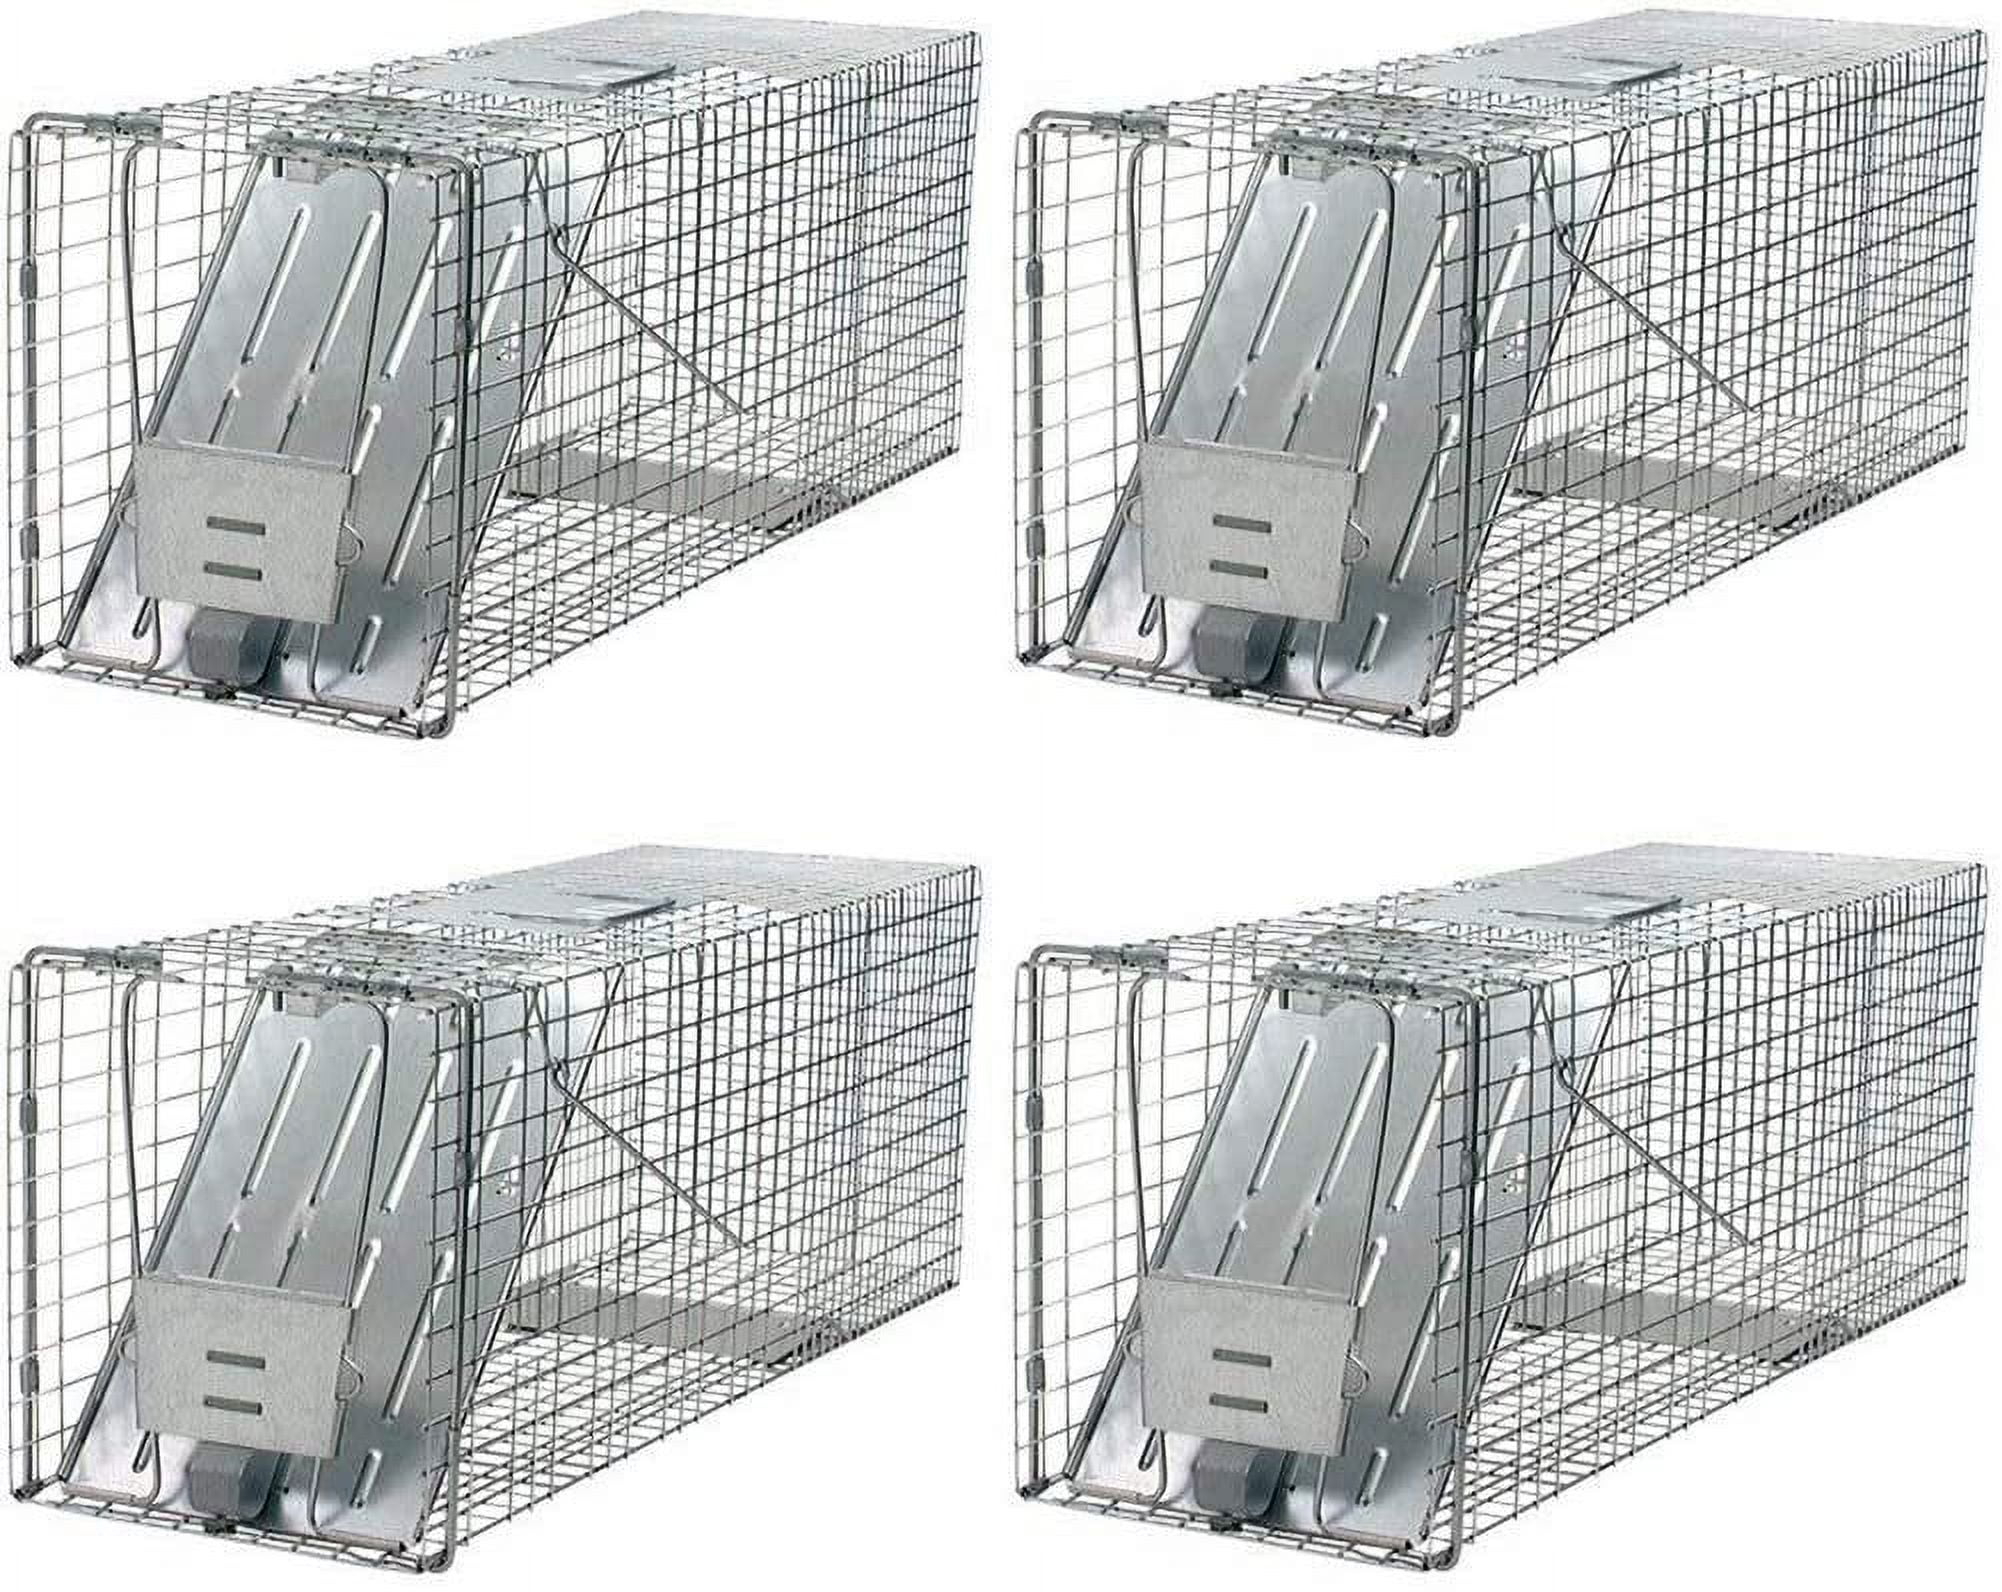 Havahart 1079 Large 1-Door Humane Animal Trap for Raccoons, Cats,  Groundhogs, Opossums (Pack of 4)